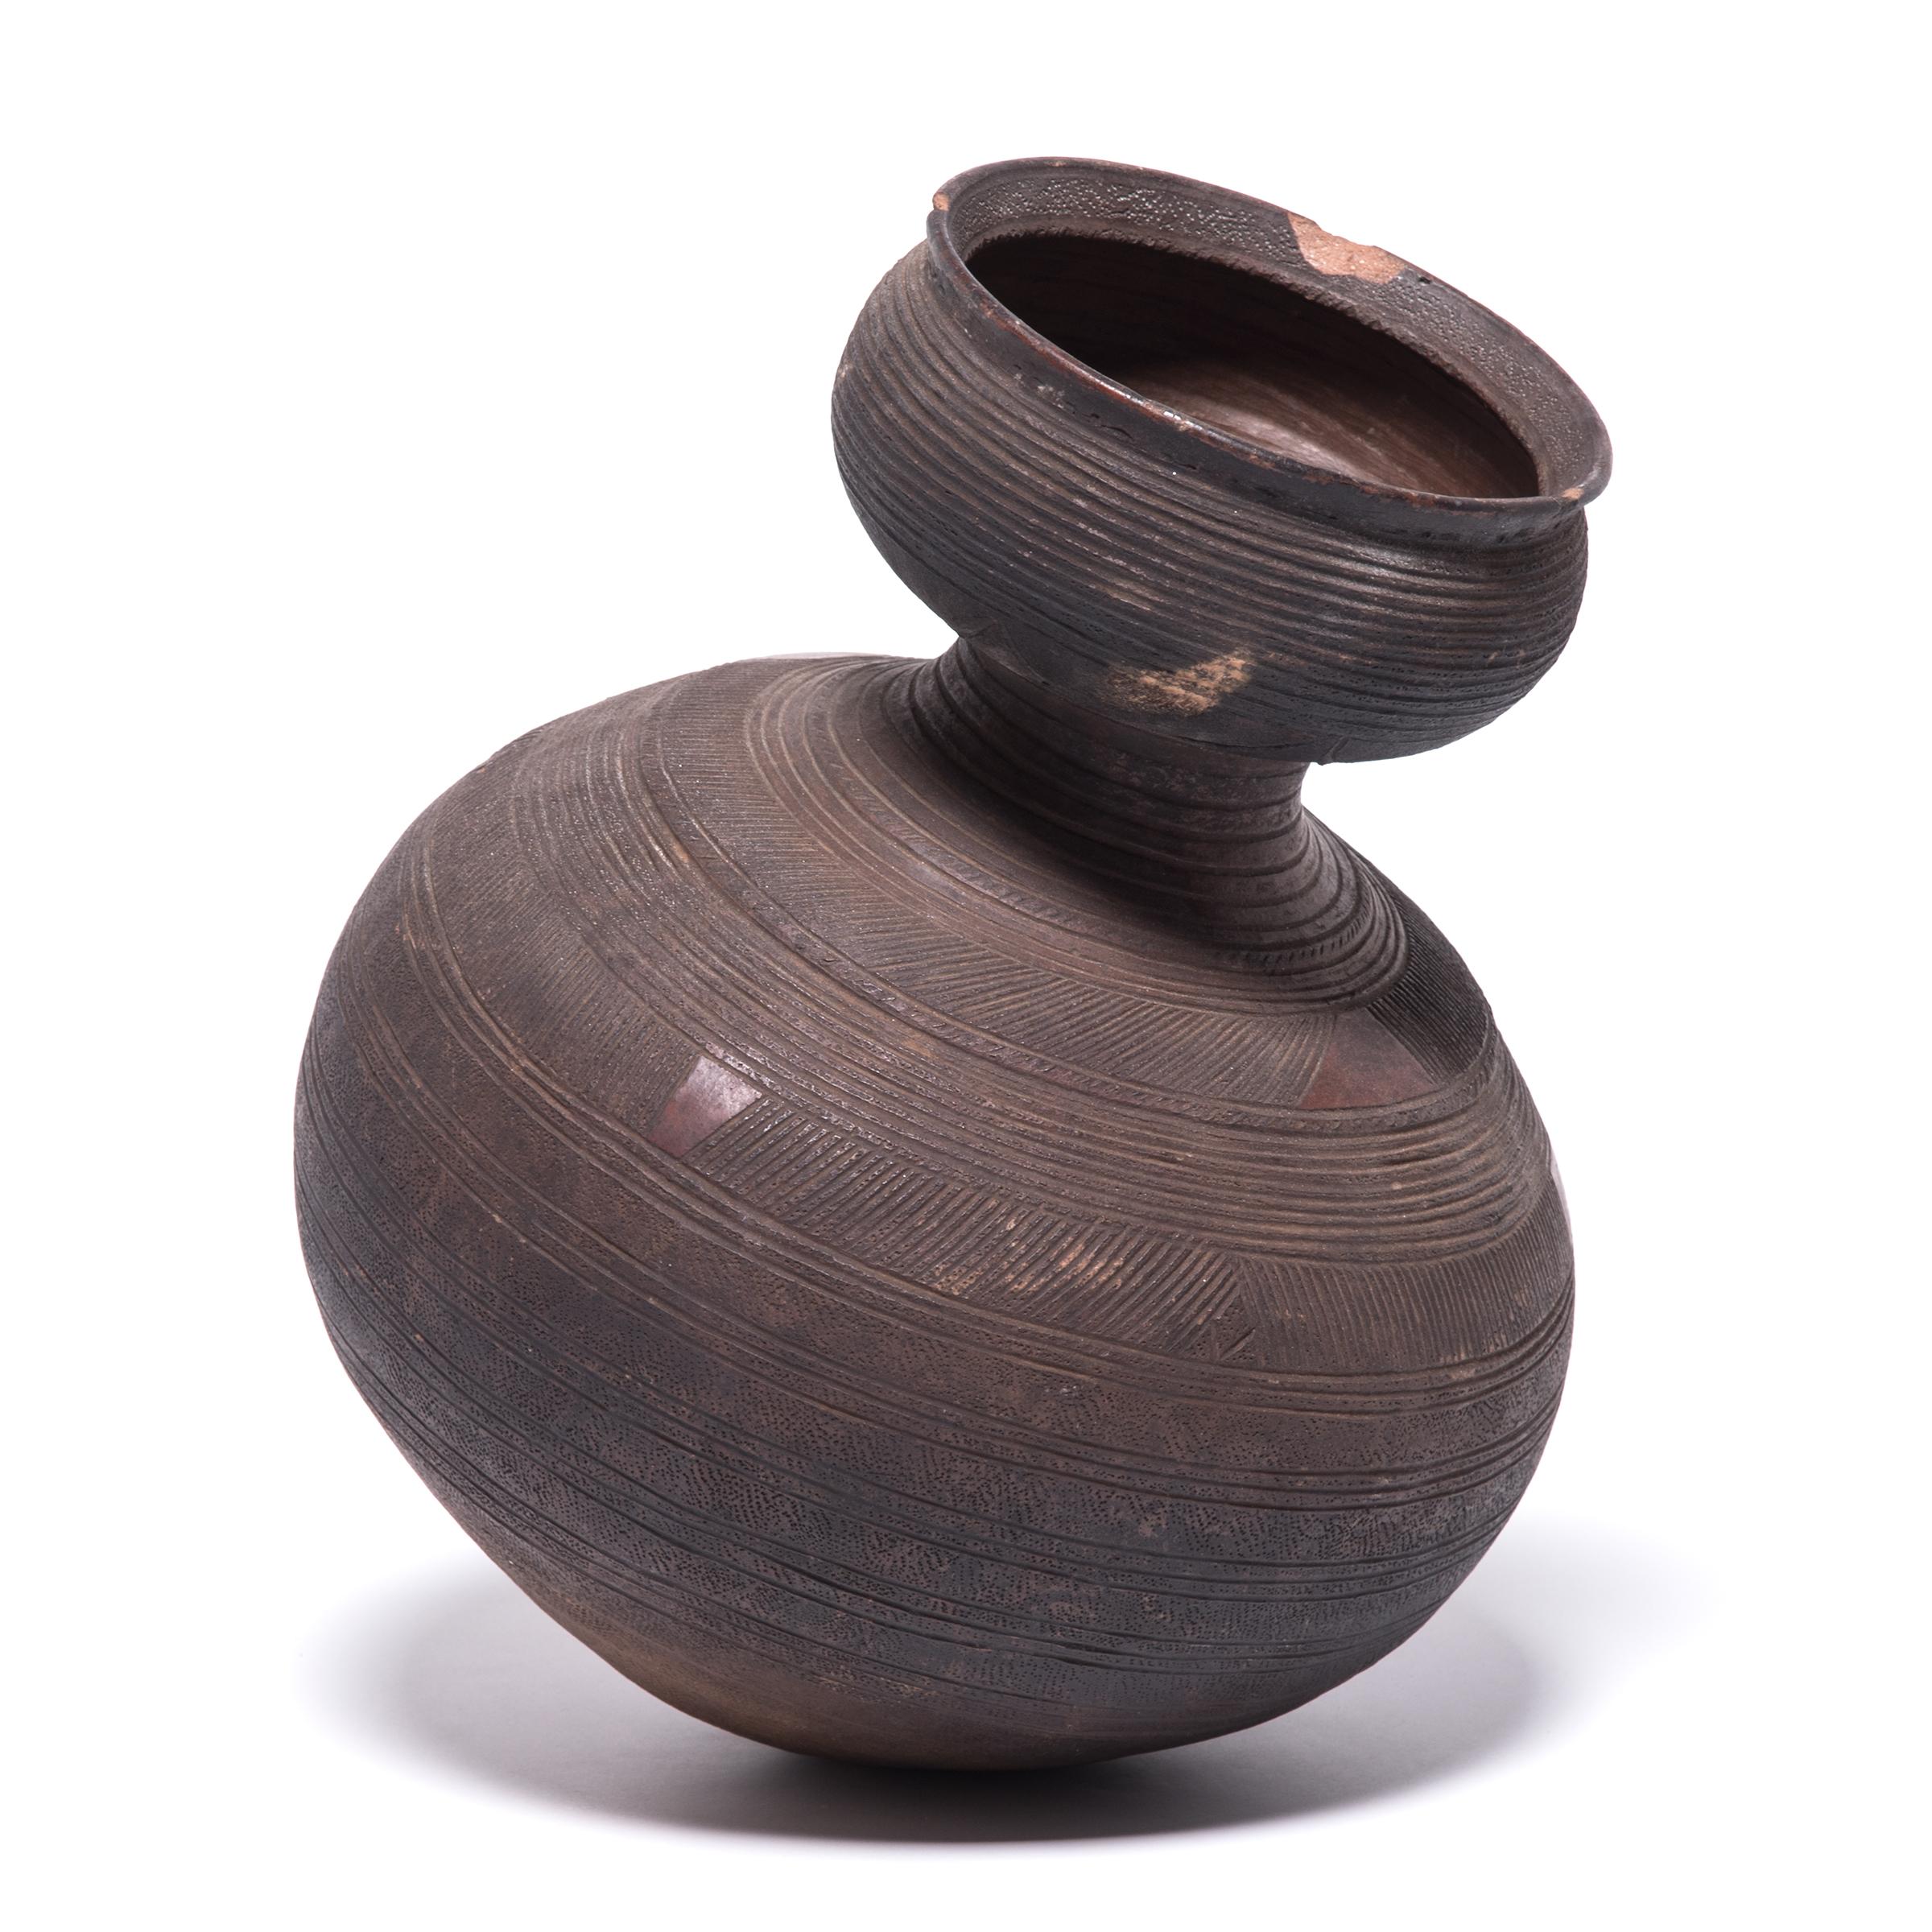 Inspired by the natural world, Nupe ceramicists fired this water vessel in the shape of a gourd. The vessel's varied textures and colors come from its functional design. The dimpling and geometric markings were engraved to give the drinker a better